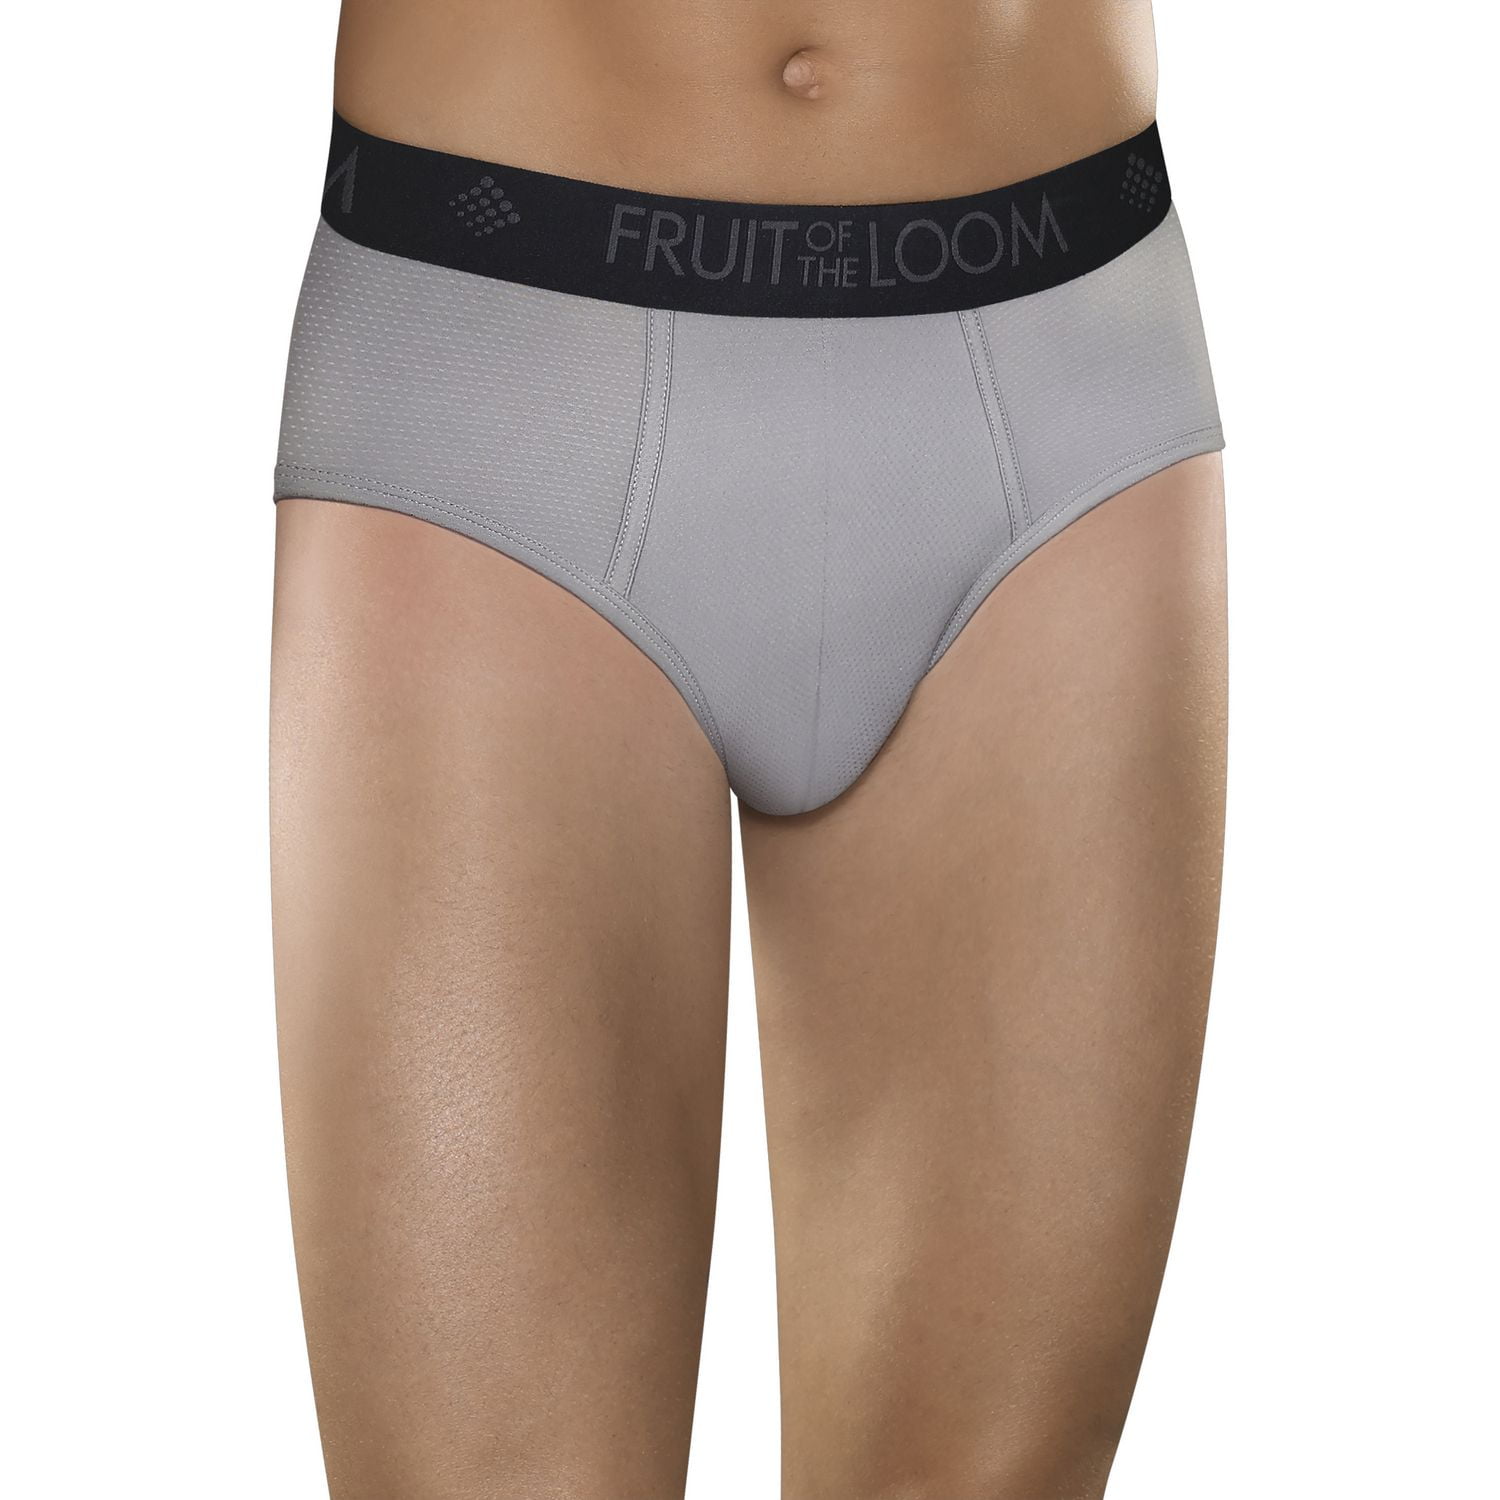 BIG MAN FRUIT OF THE LOOM 3 Boxer Briefs Breathable MicroMesh Underwear